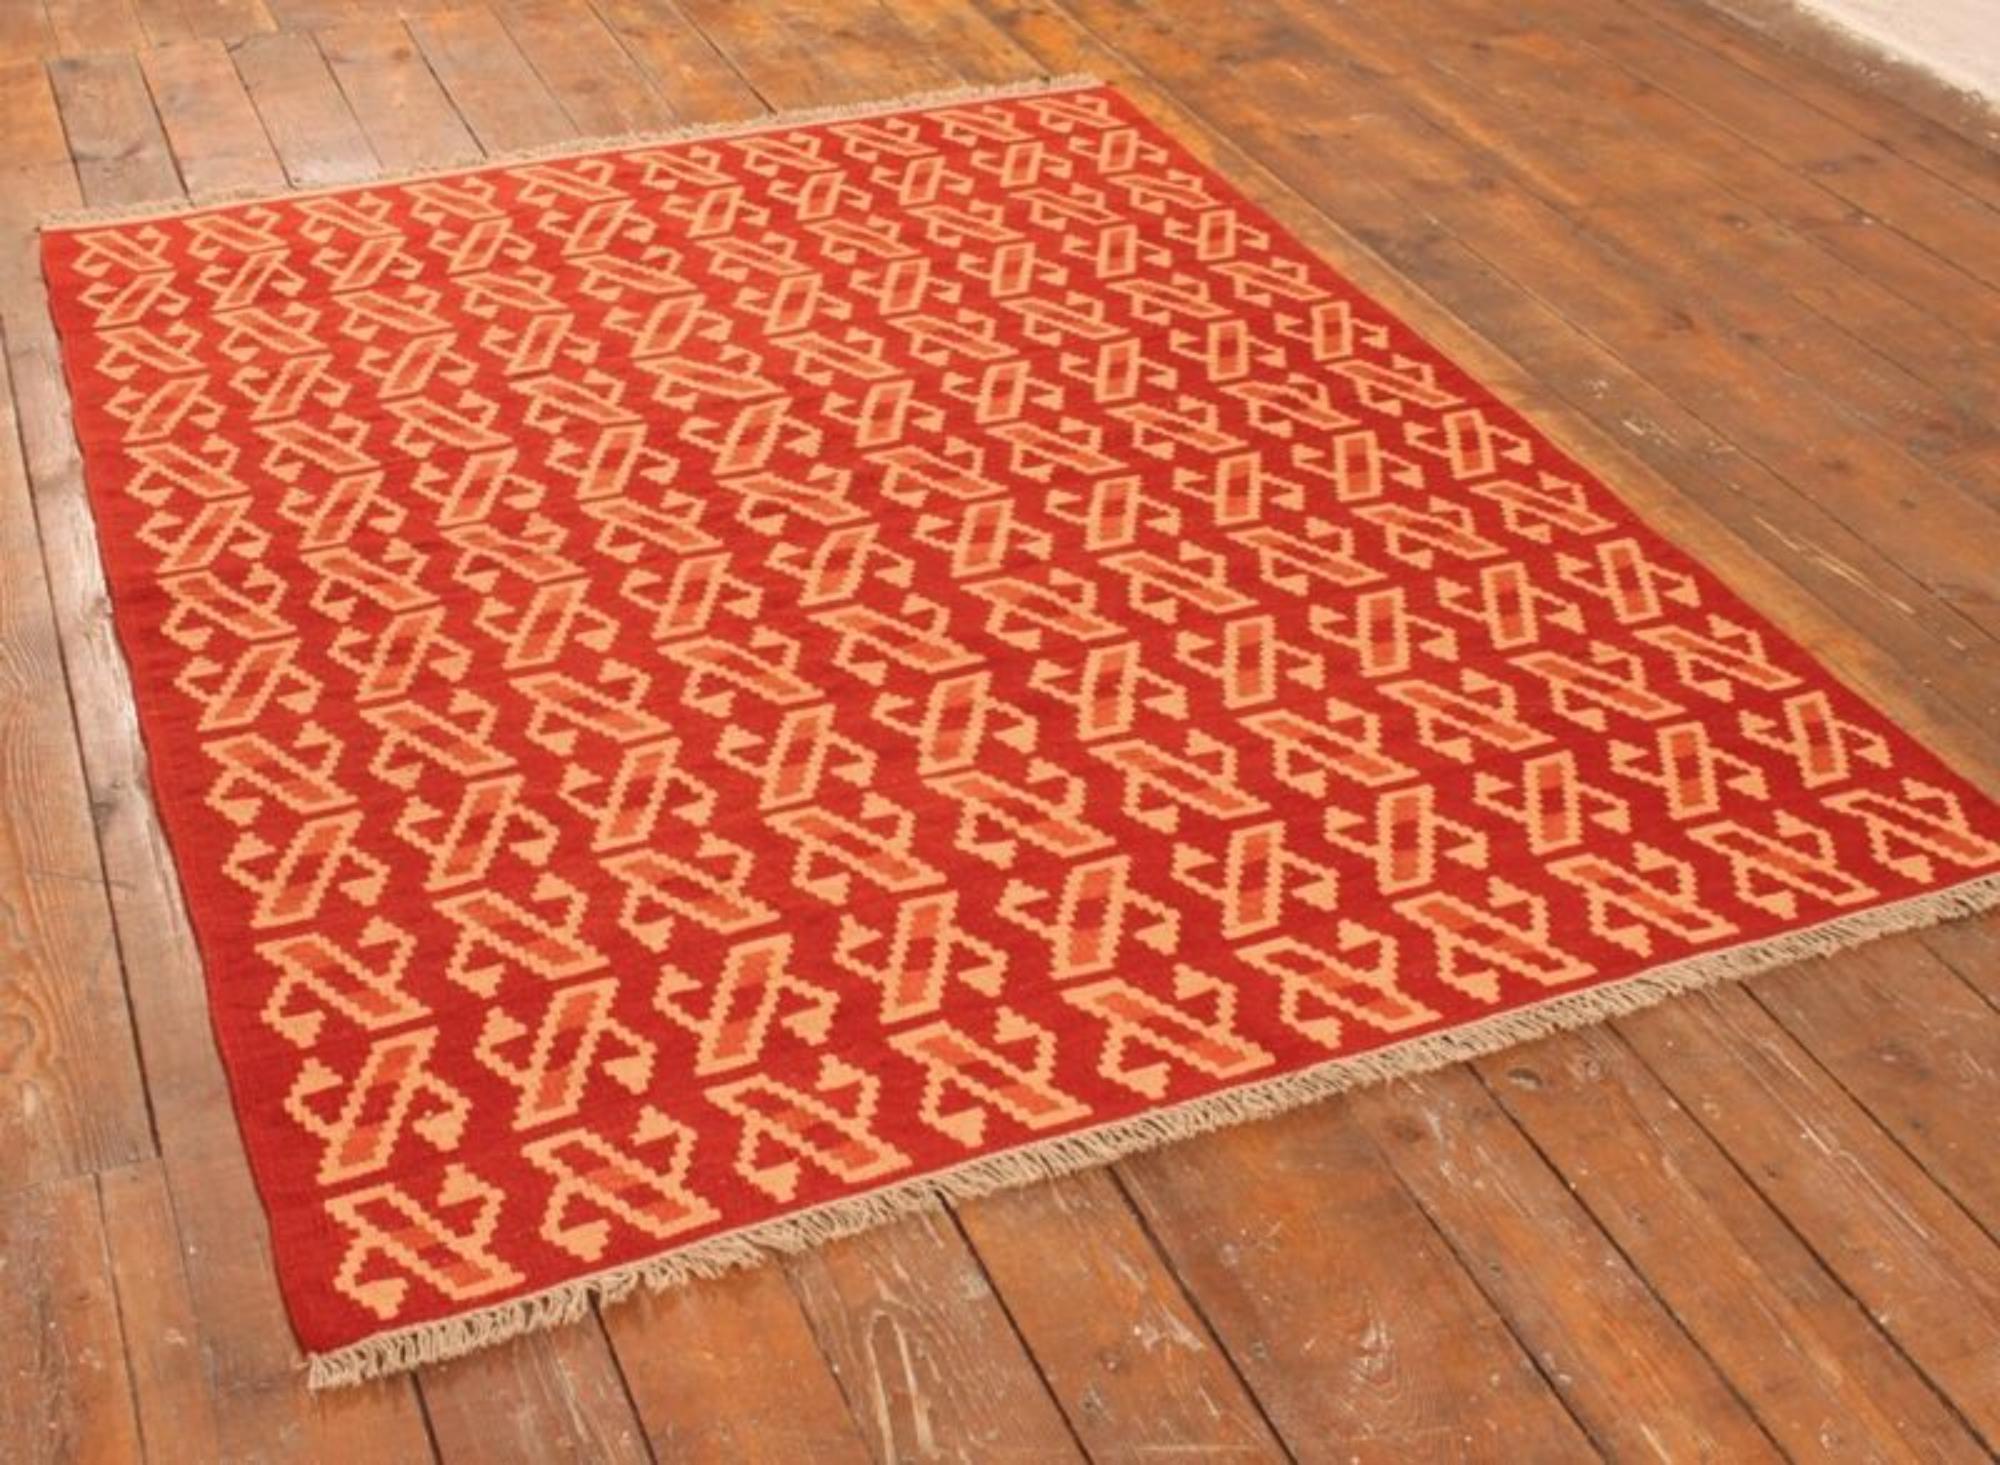 Handmade Vintage Persian Style Ardabil Kilim Rug 5.2' x 6.8', 1970s - 1T36 For Sale 1